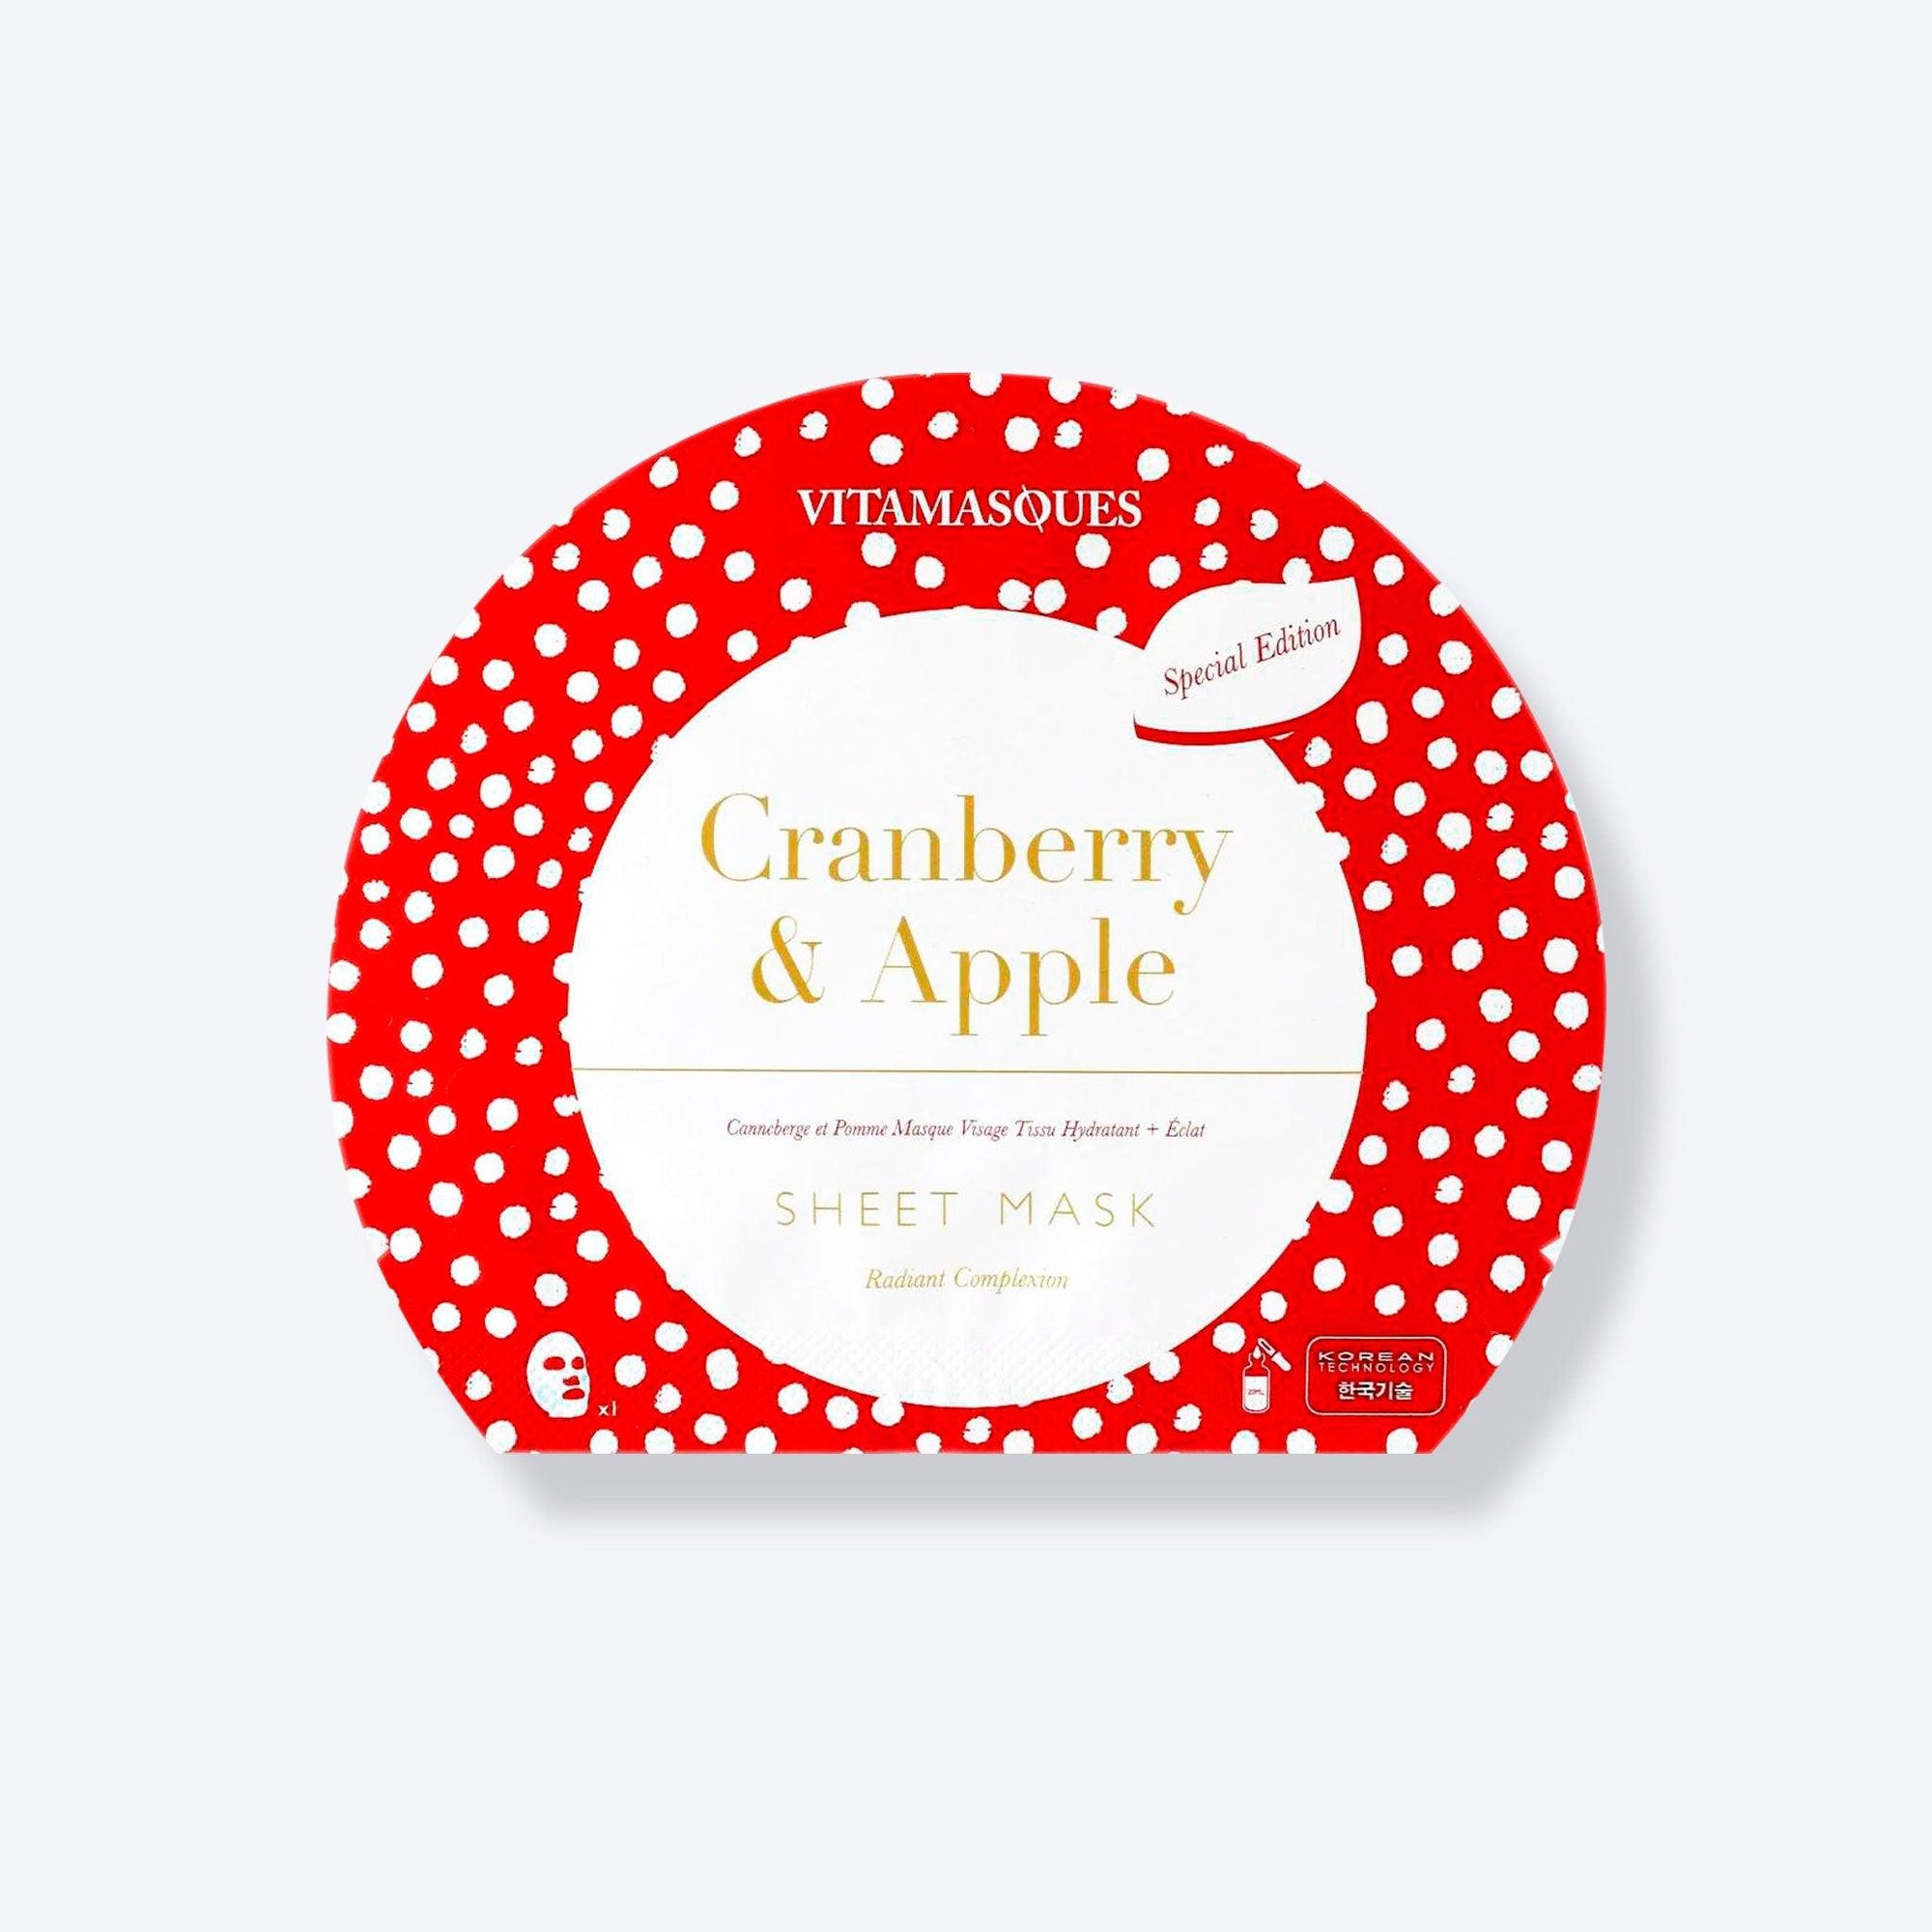 Cranberry & Apple Face Sheet Mask - Vitamasques